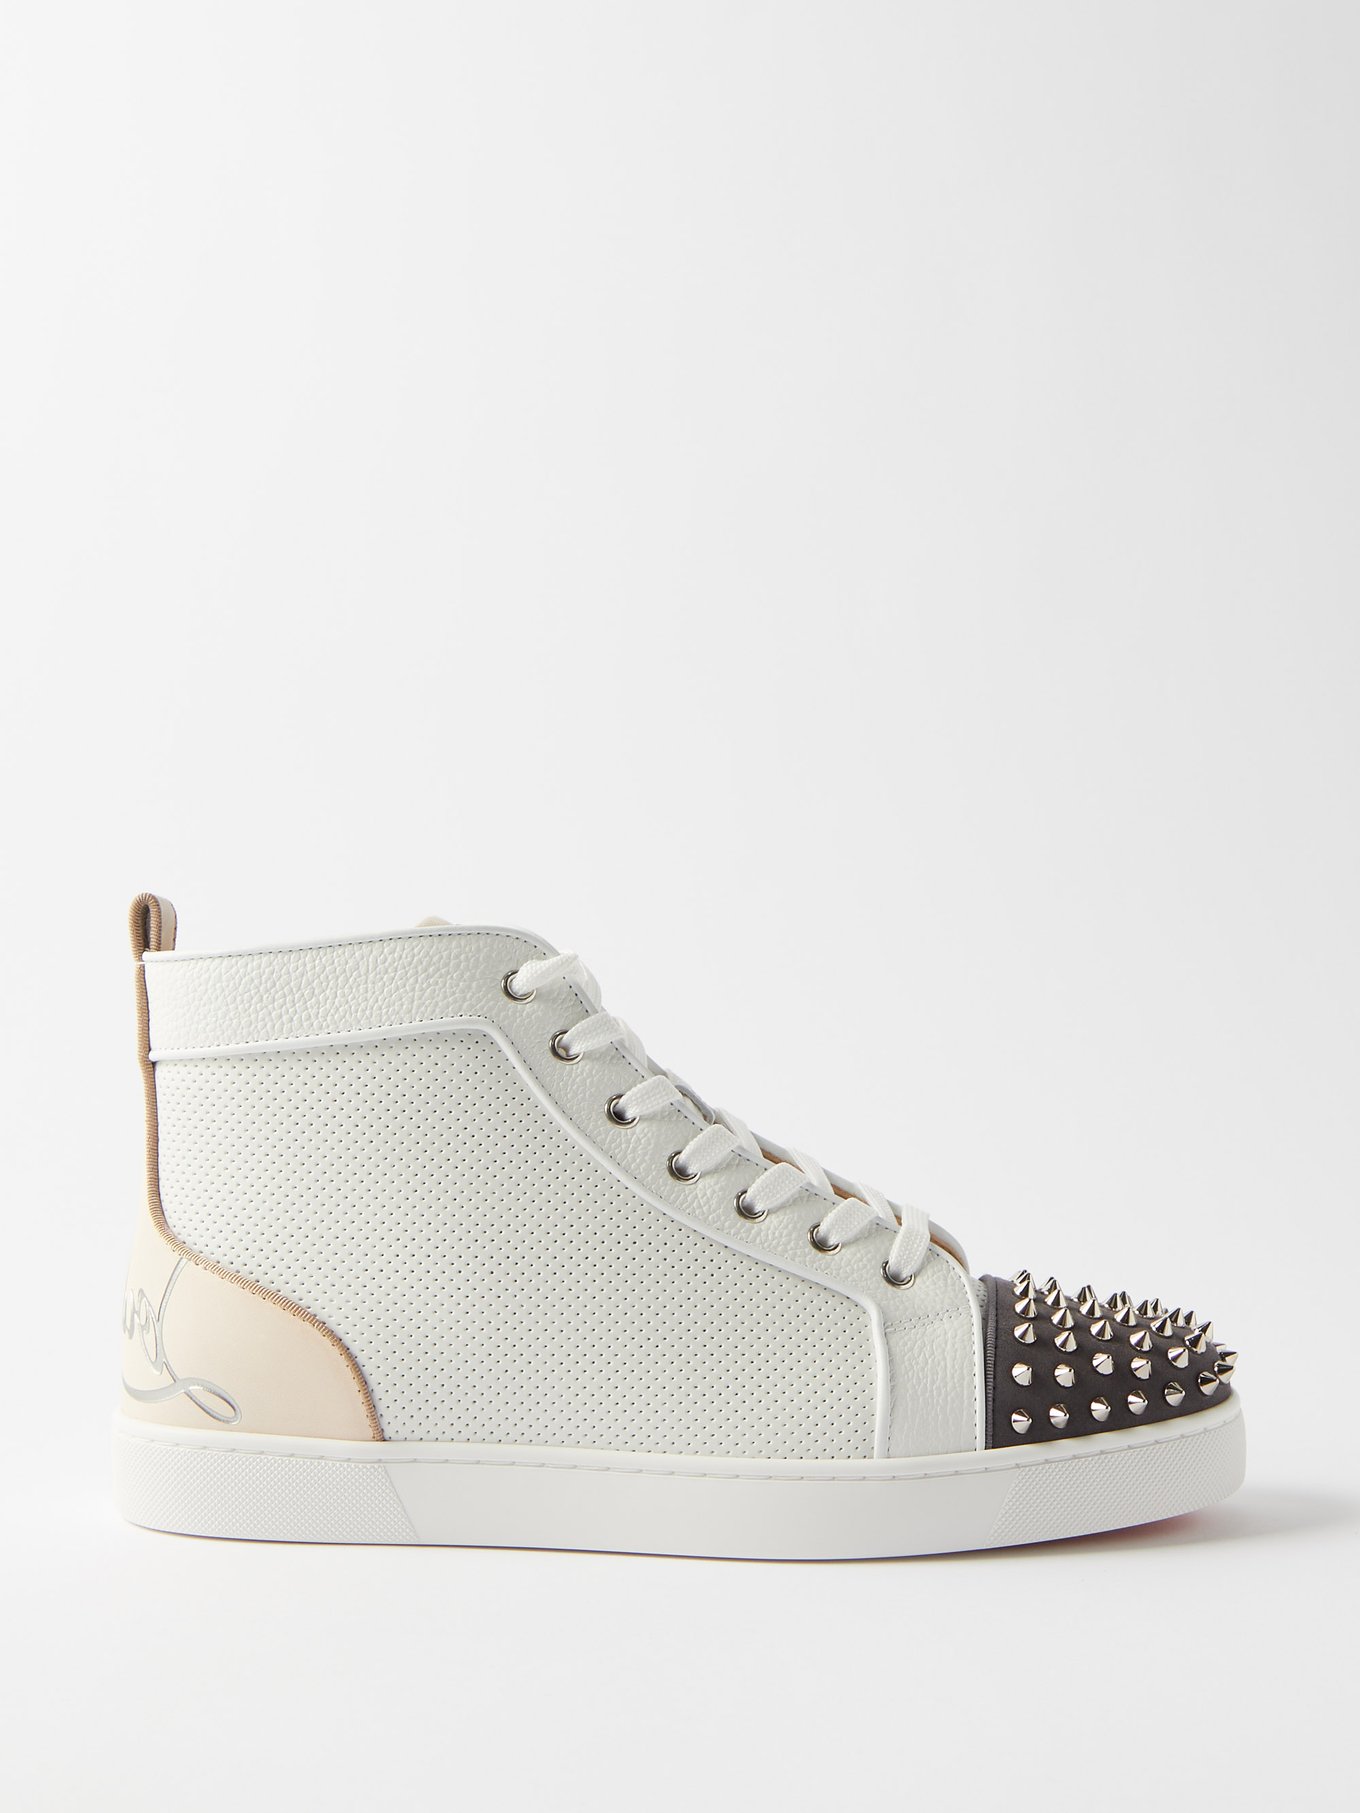 Christian Louboutin Black Leather Louis Spikes High Top Sneakers Size 41.5  Christian Louboutin | The Luxury Closet